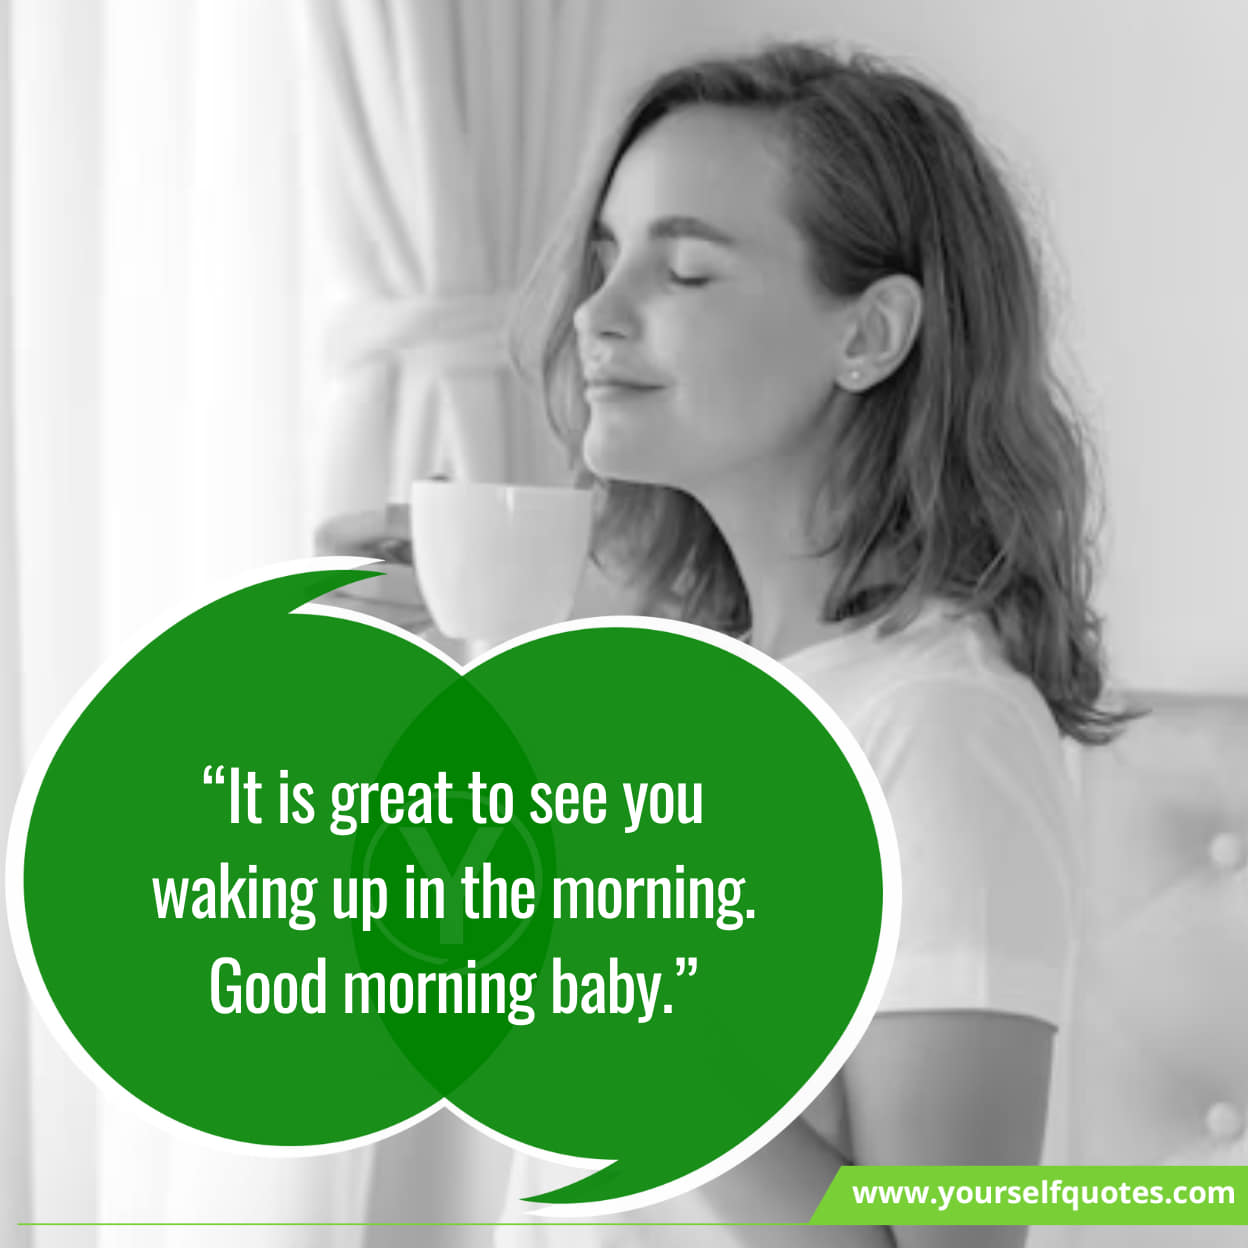 Heartwarming Good Morning Message for Wife